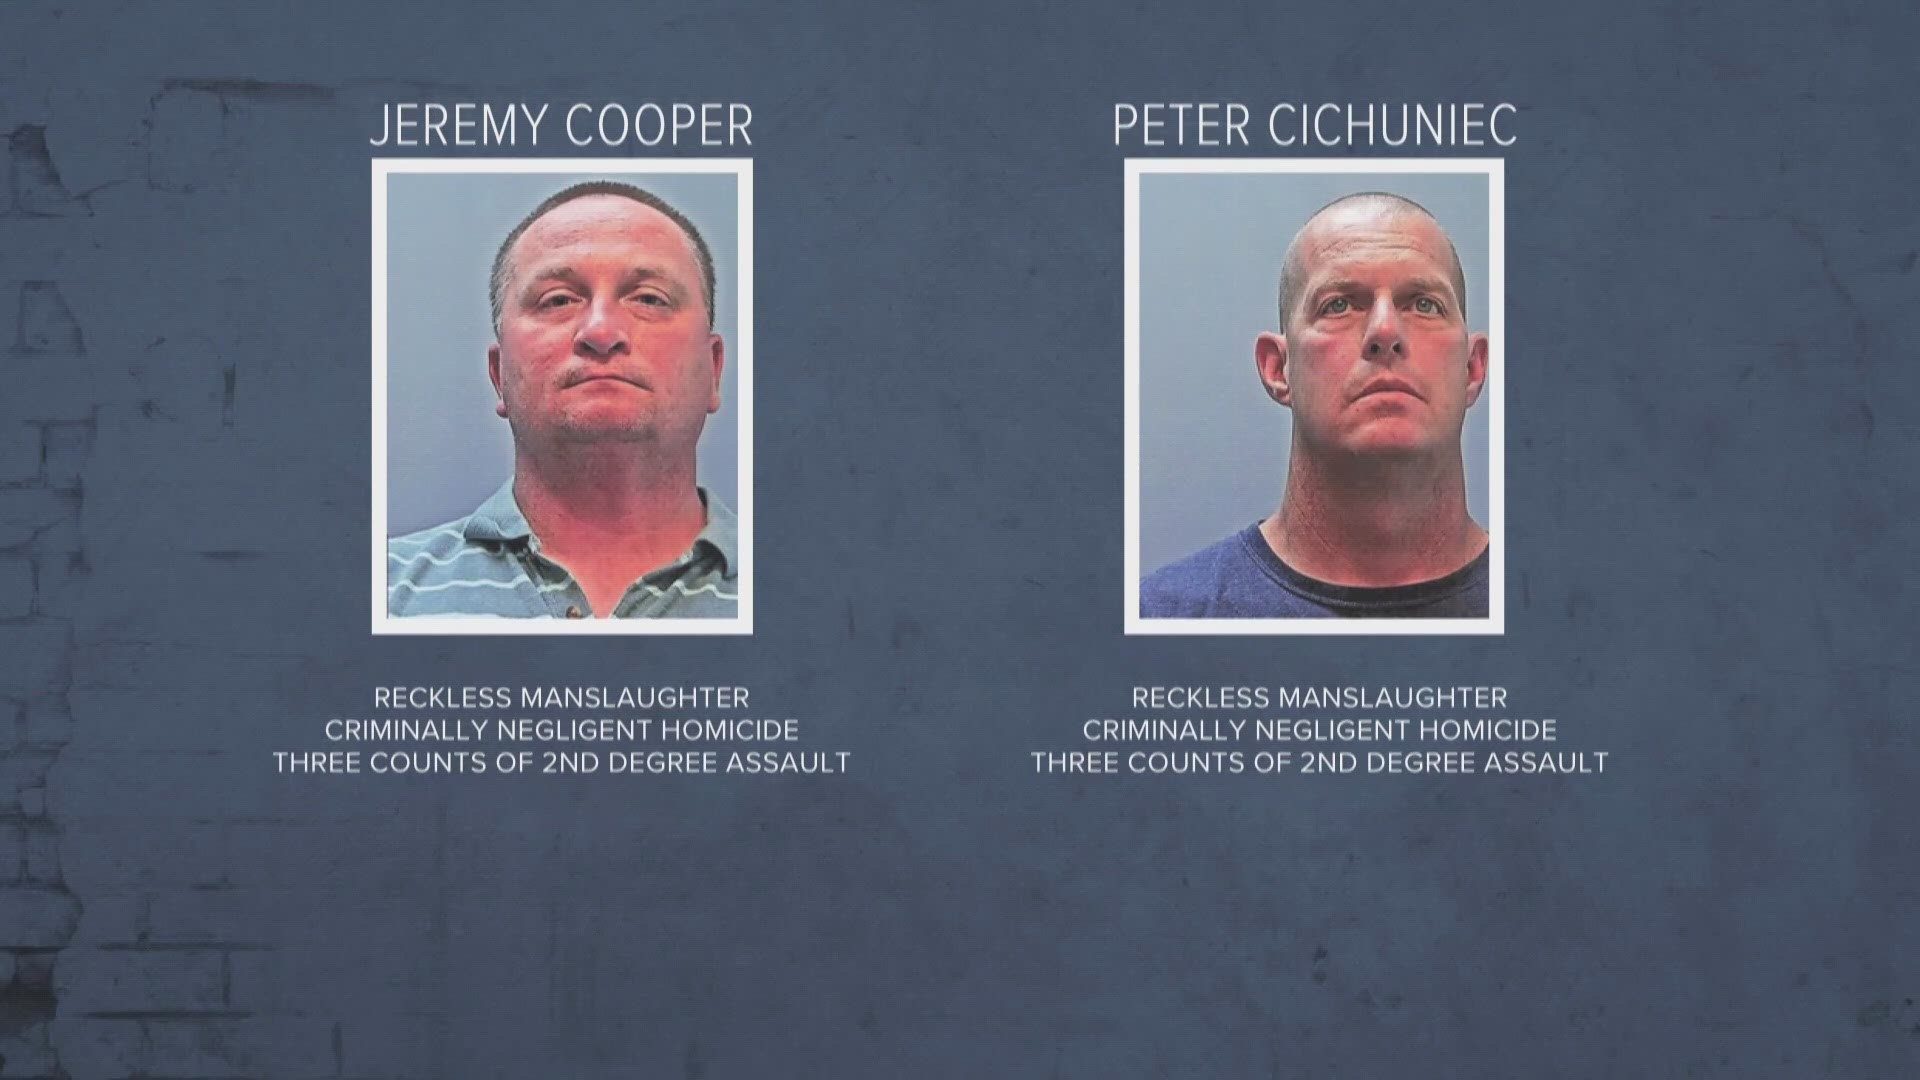 Jeremy Cooper and Peter Cichuniec are charged with reckless manslaughter and three counts of second-degree assault related to McClain's 2019 death.